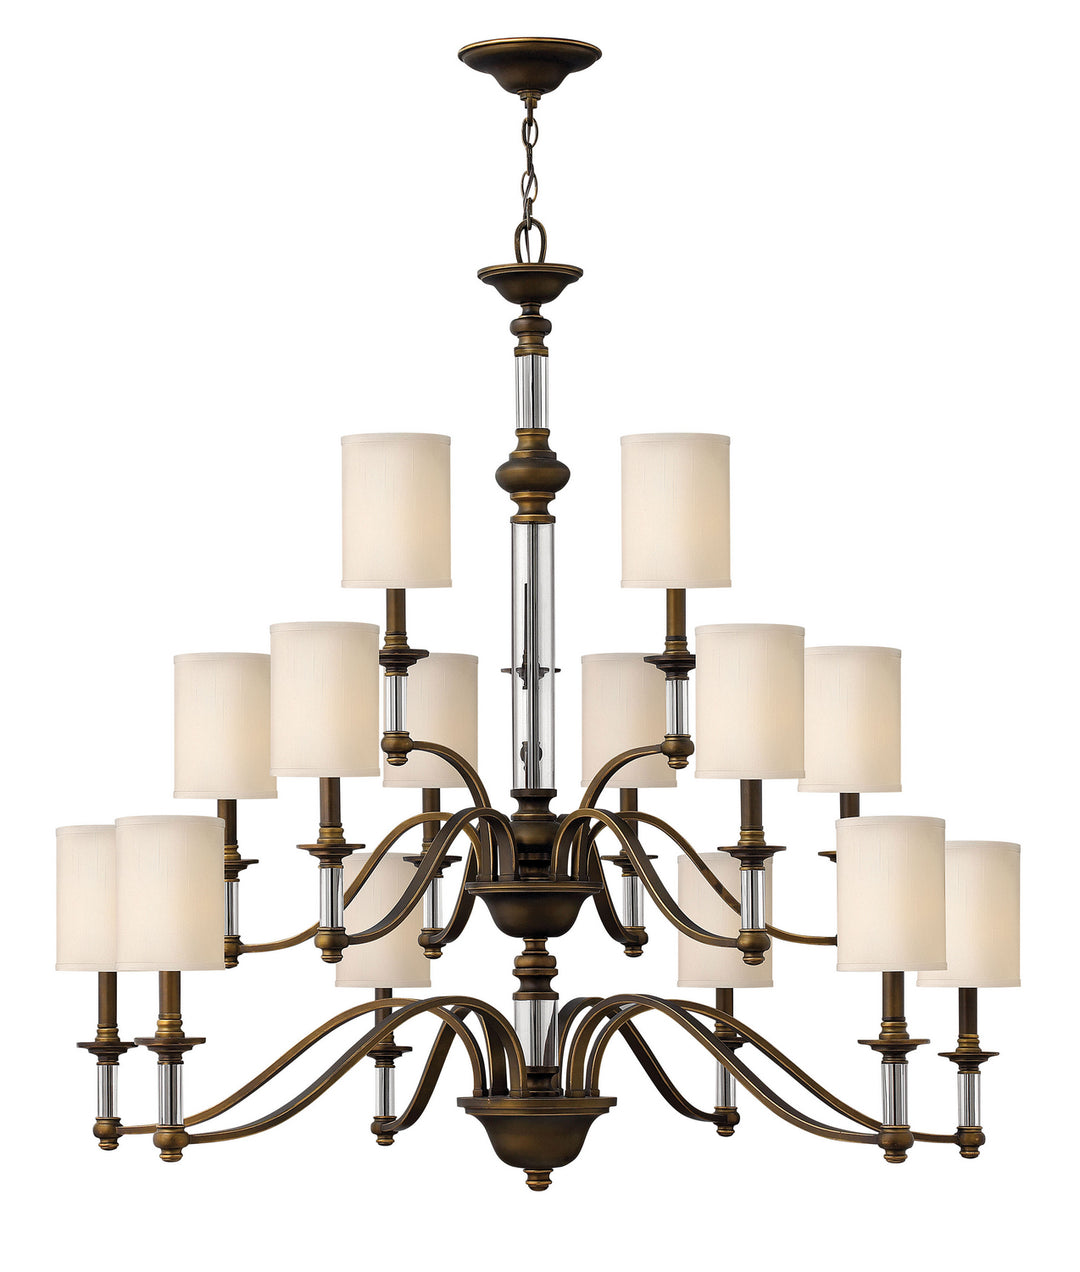 Sussex LED Foyer Chandelier in English Bronze